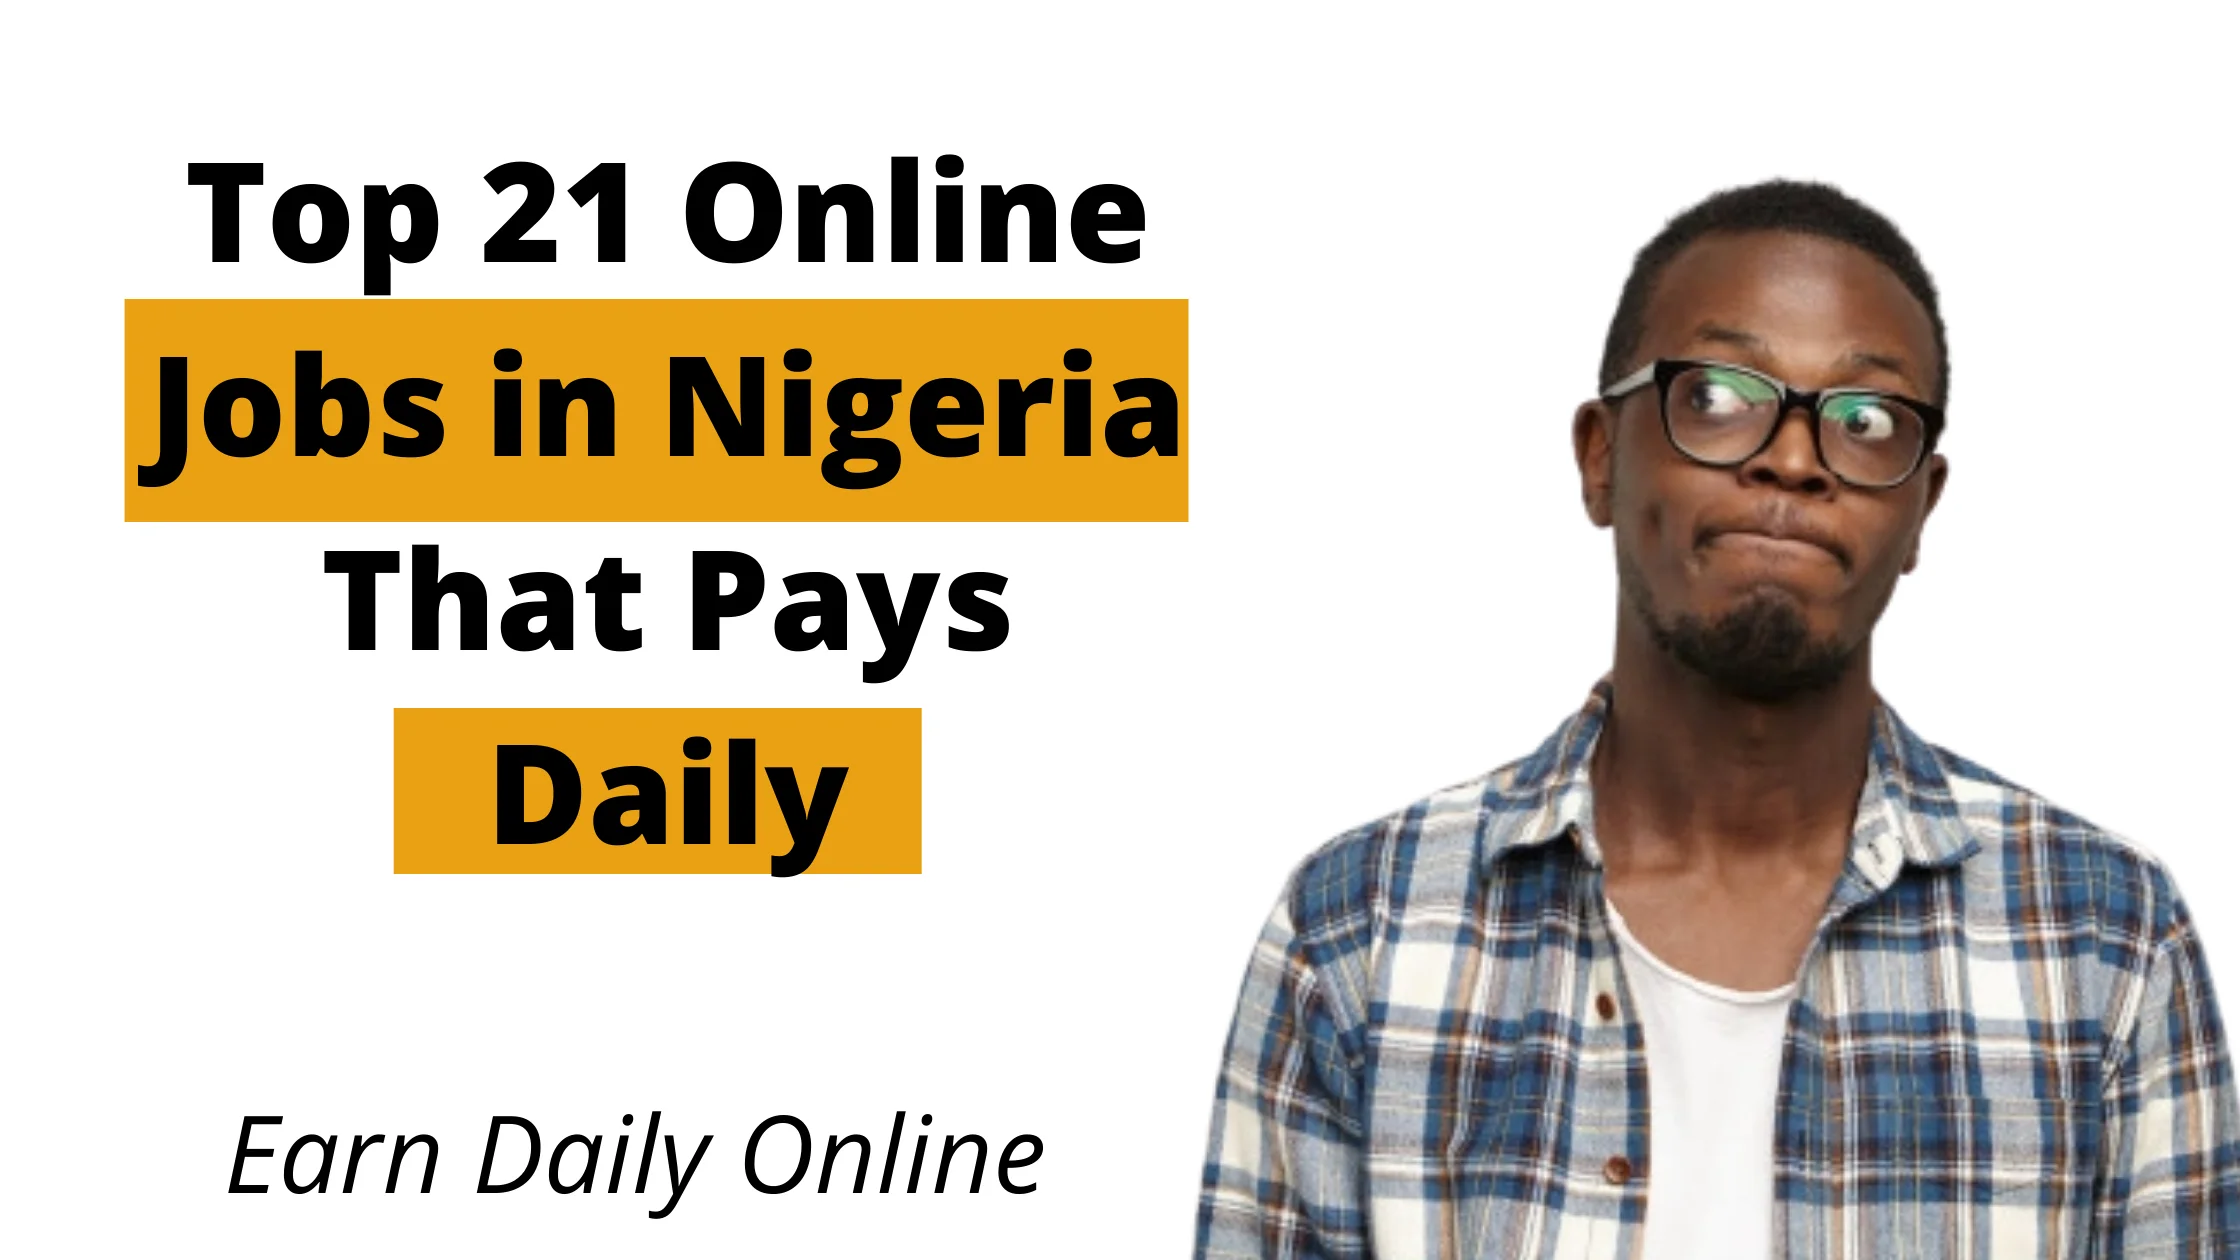 Online Jobs in Nigeria That Pays Daily